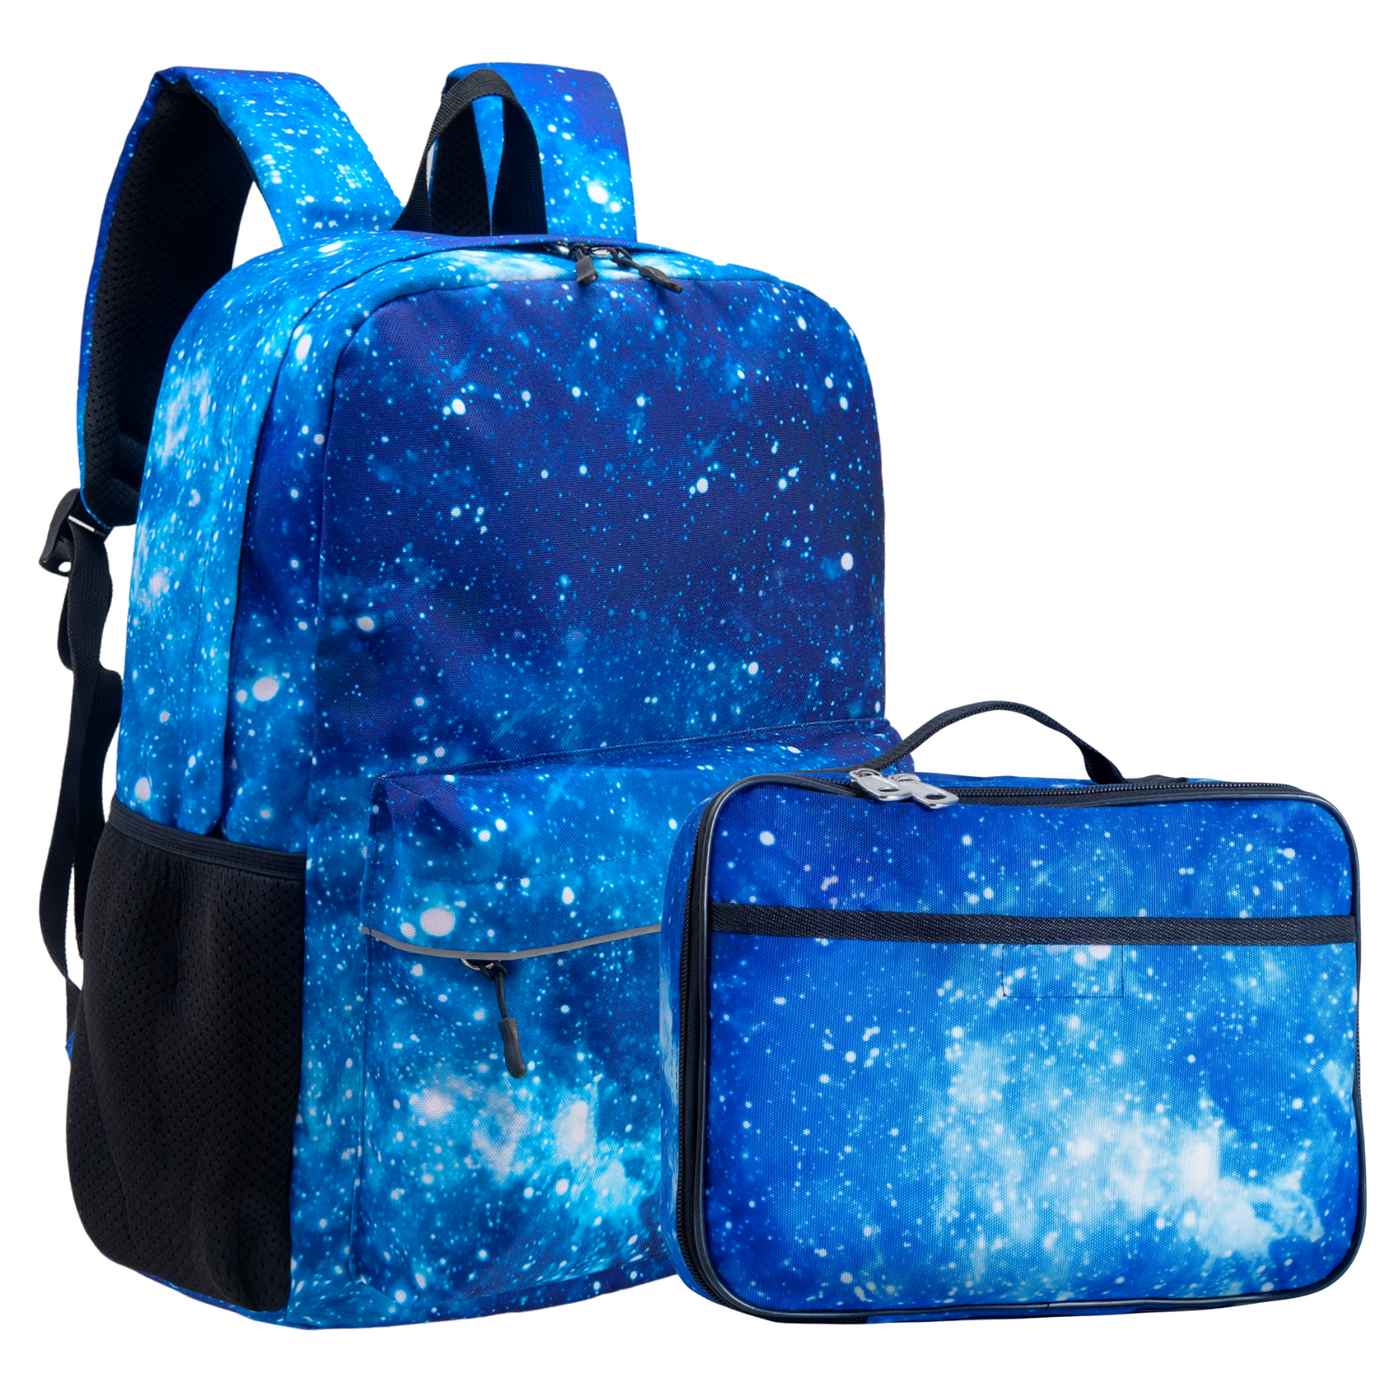 Kids Backpack and Lunch Box Set, Galaxy, Blue, Gives Back to Great